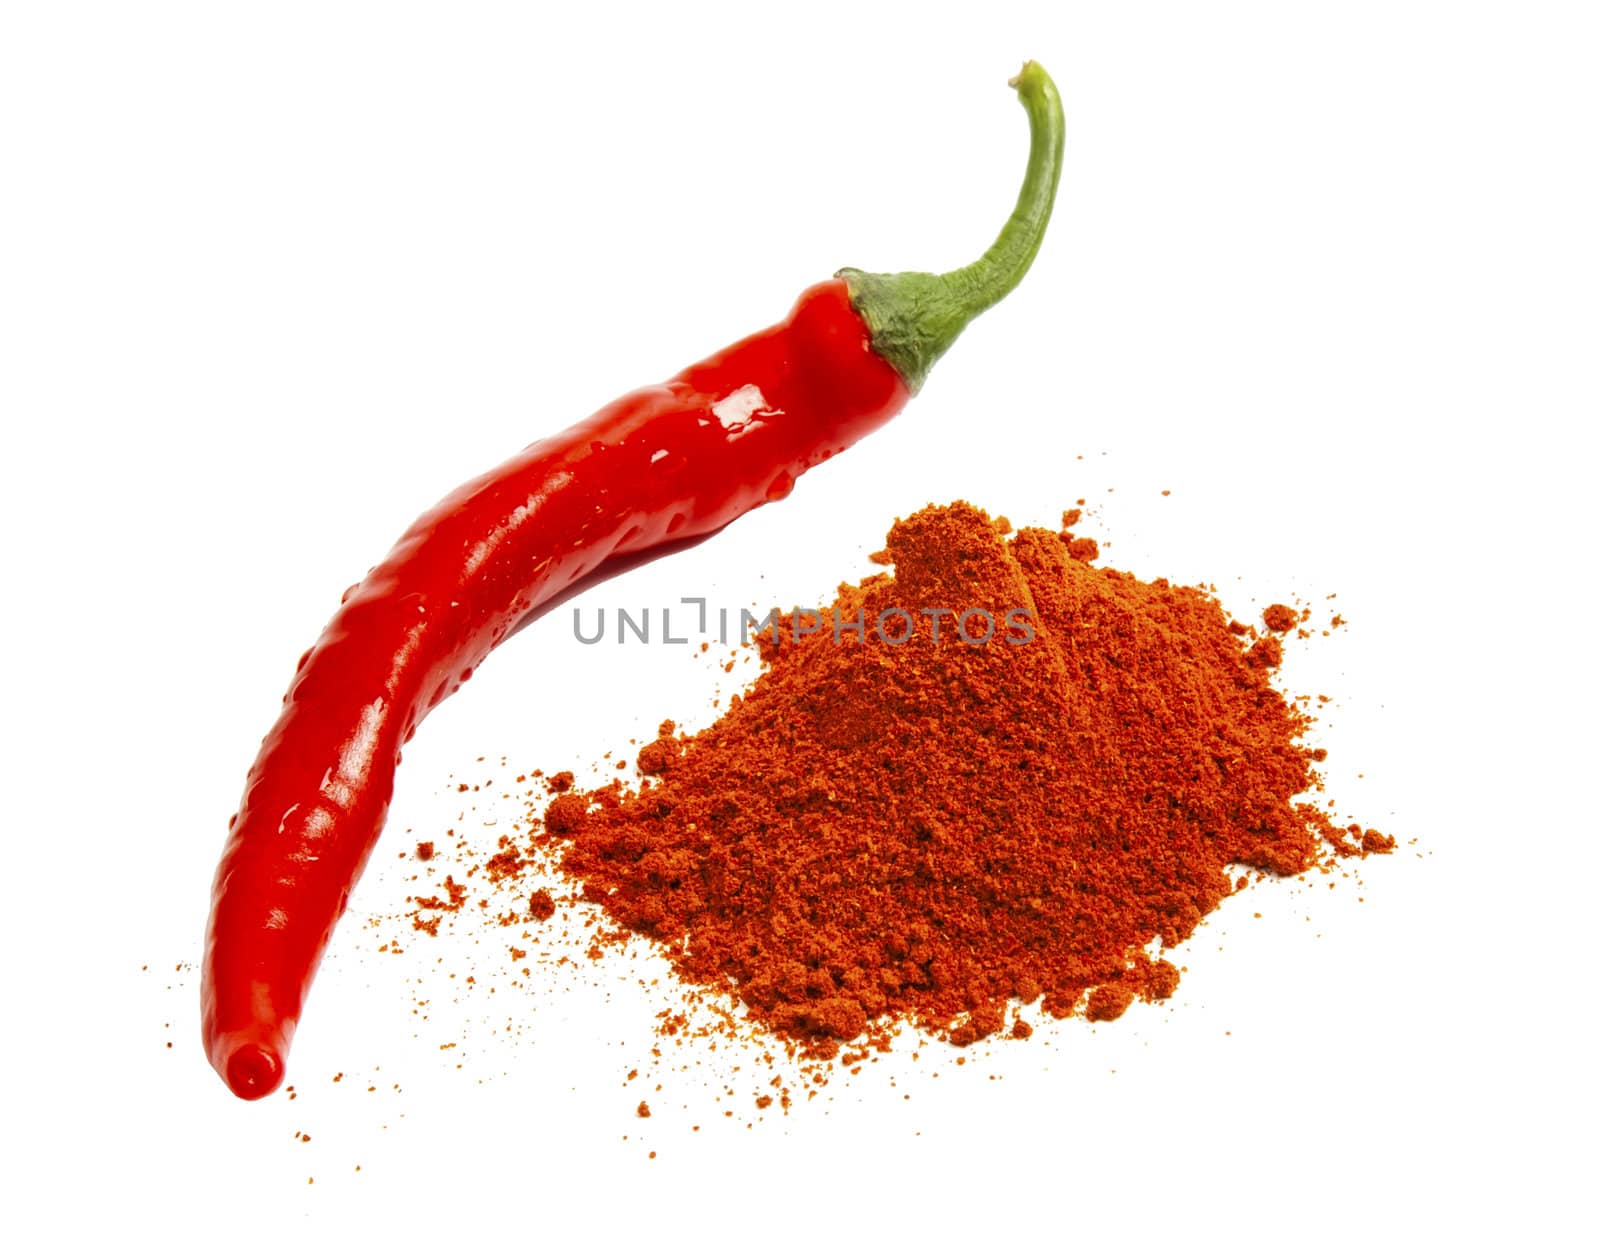 Red chili pepper and red pepper spice isolated on white